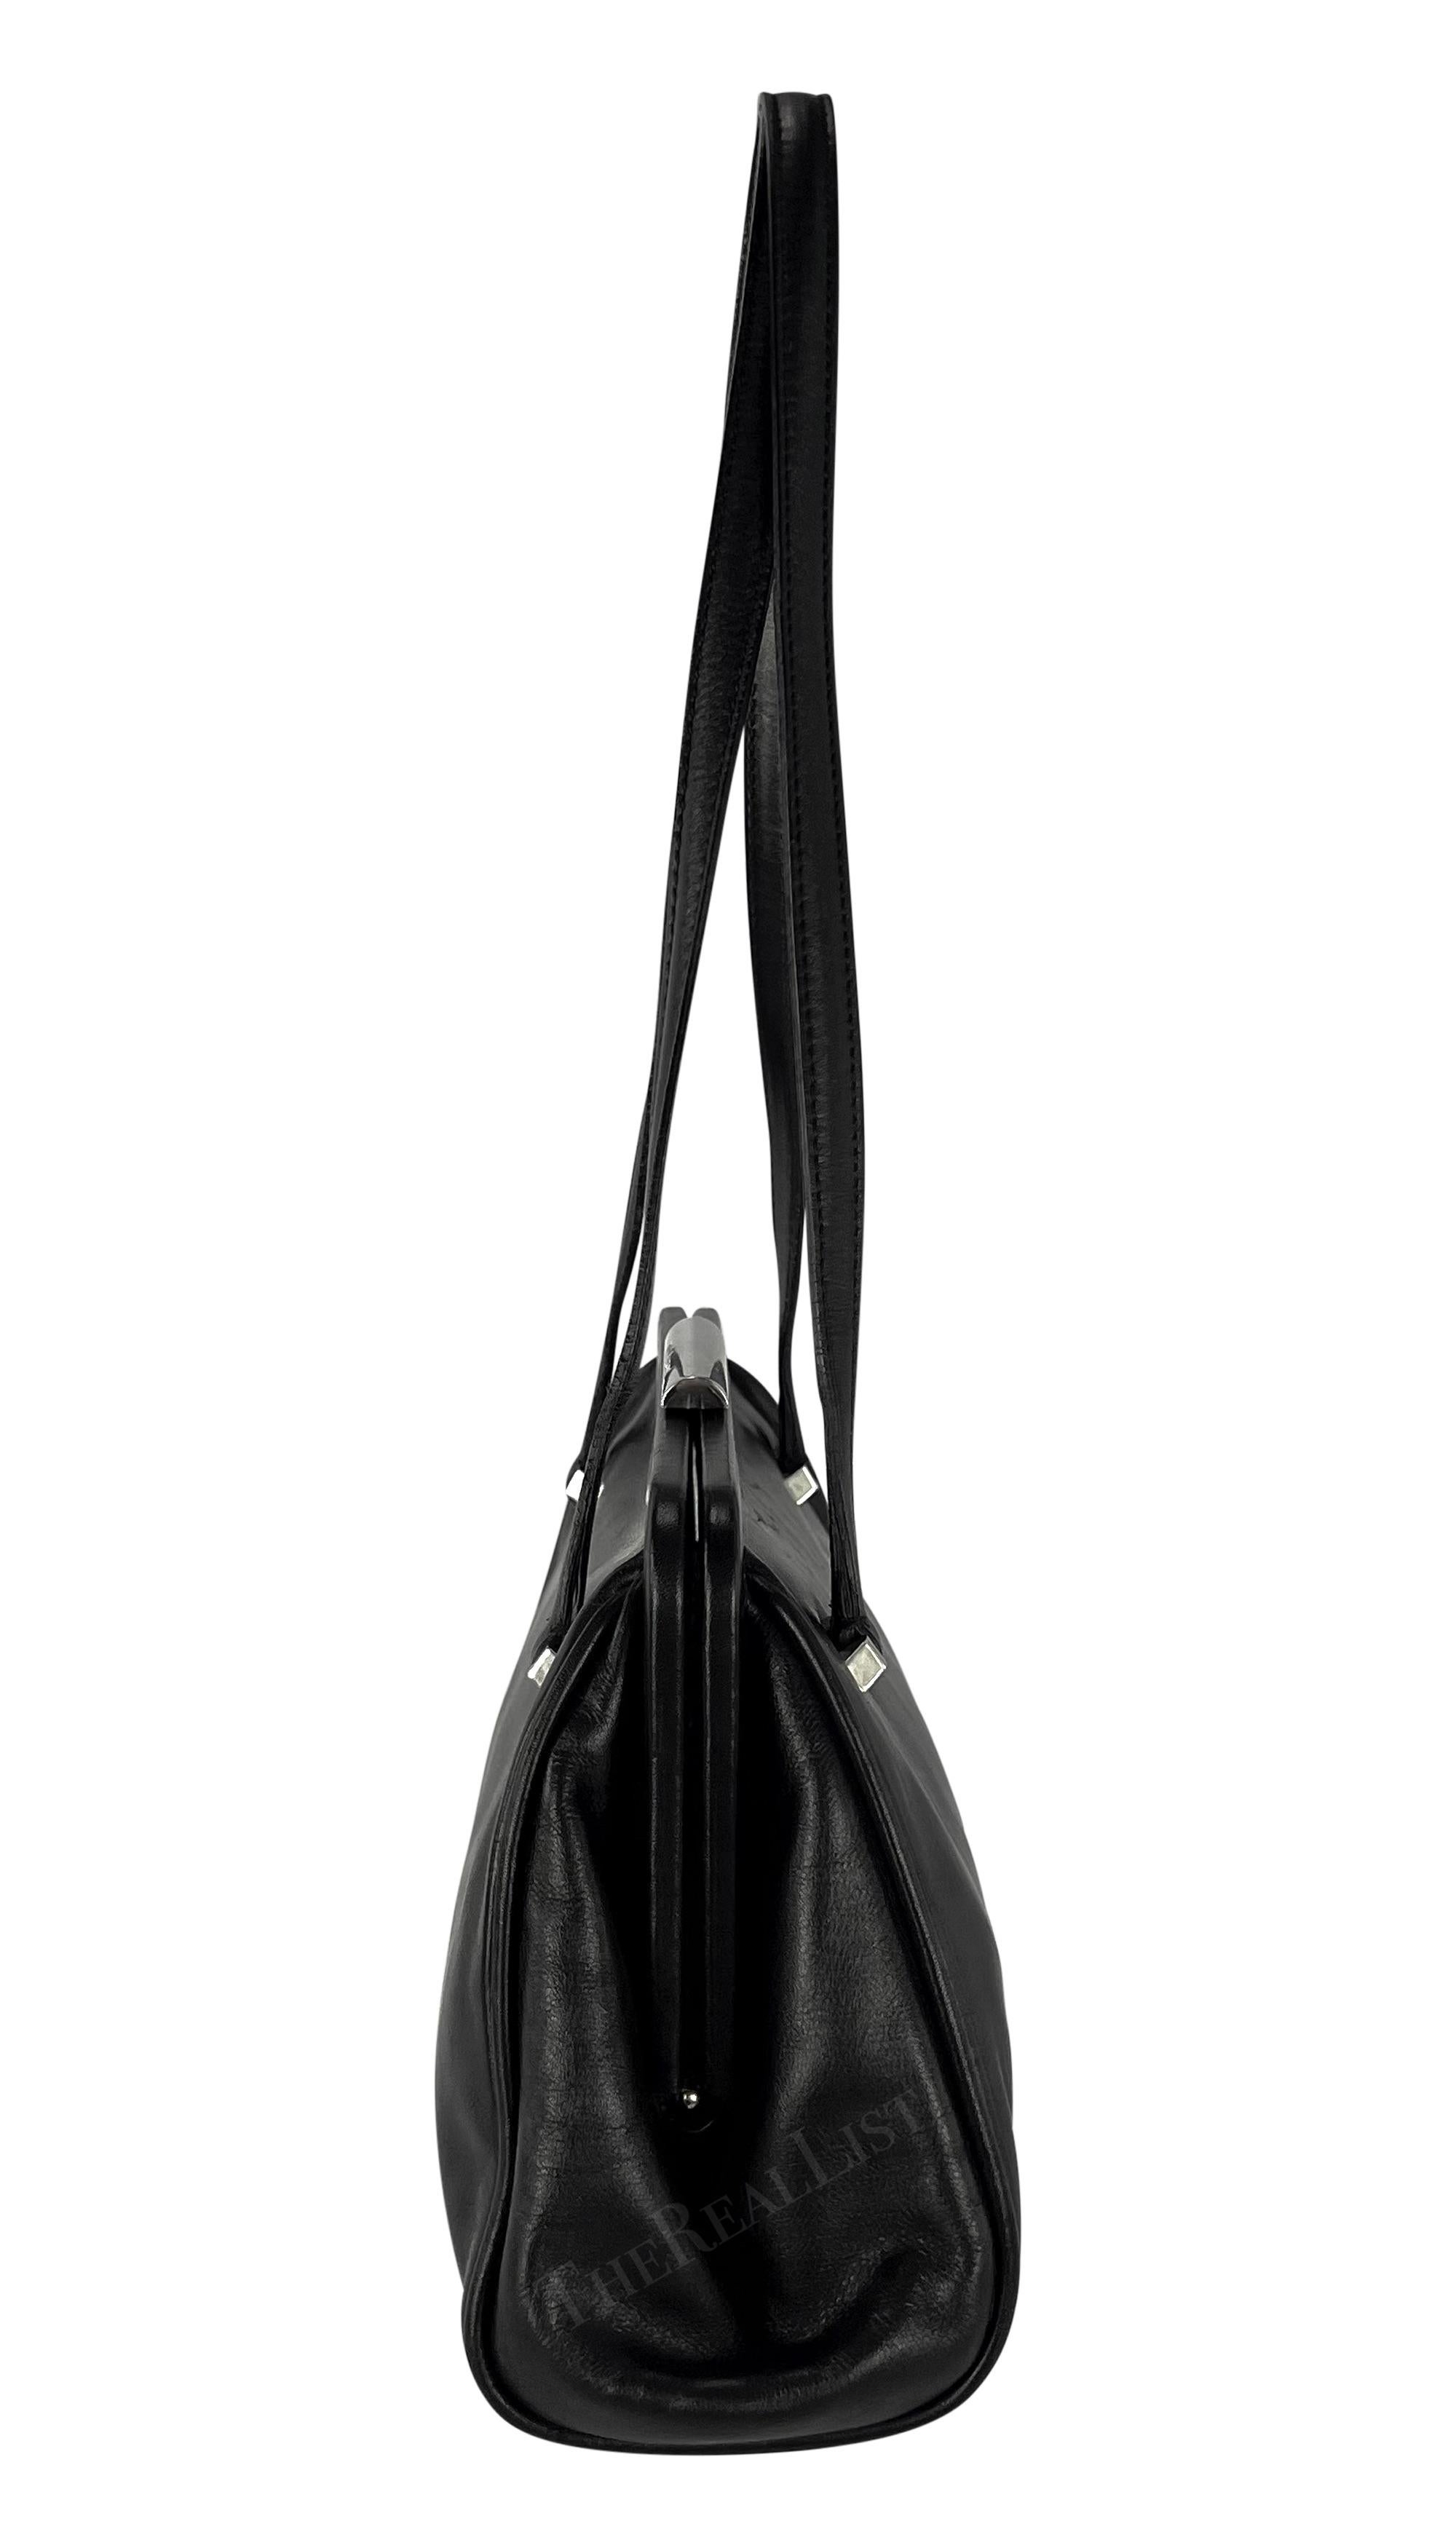 S/S 2003 Dolce & Gabbana 'Sex & Love' Black Leather Mini Shoulder Bag In Good Condition For Sale In West Hollywood, CA